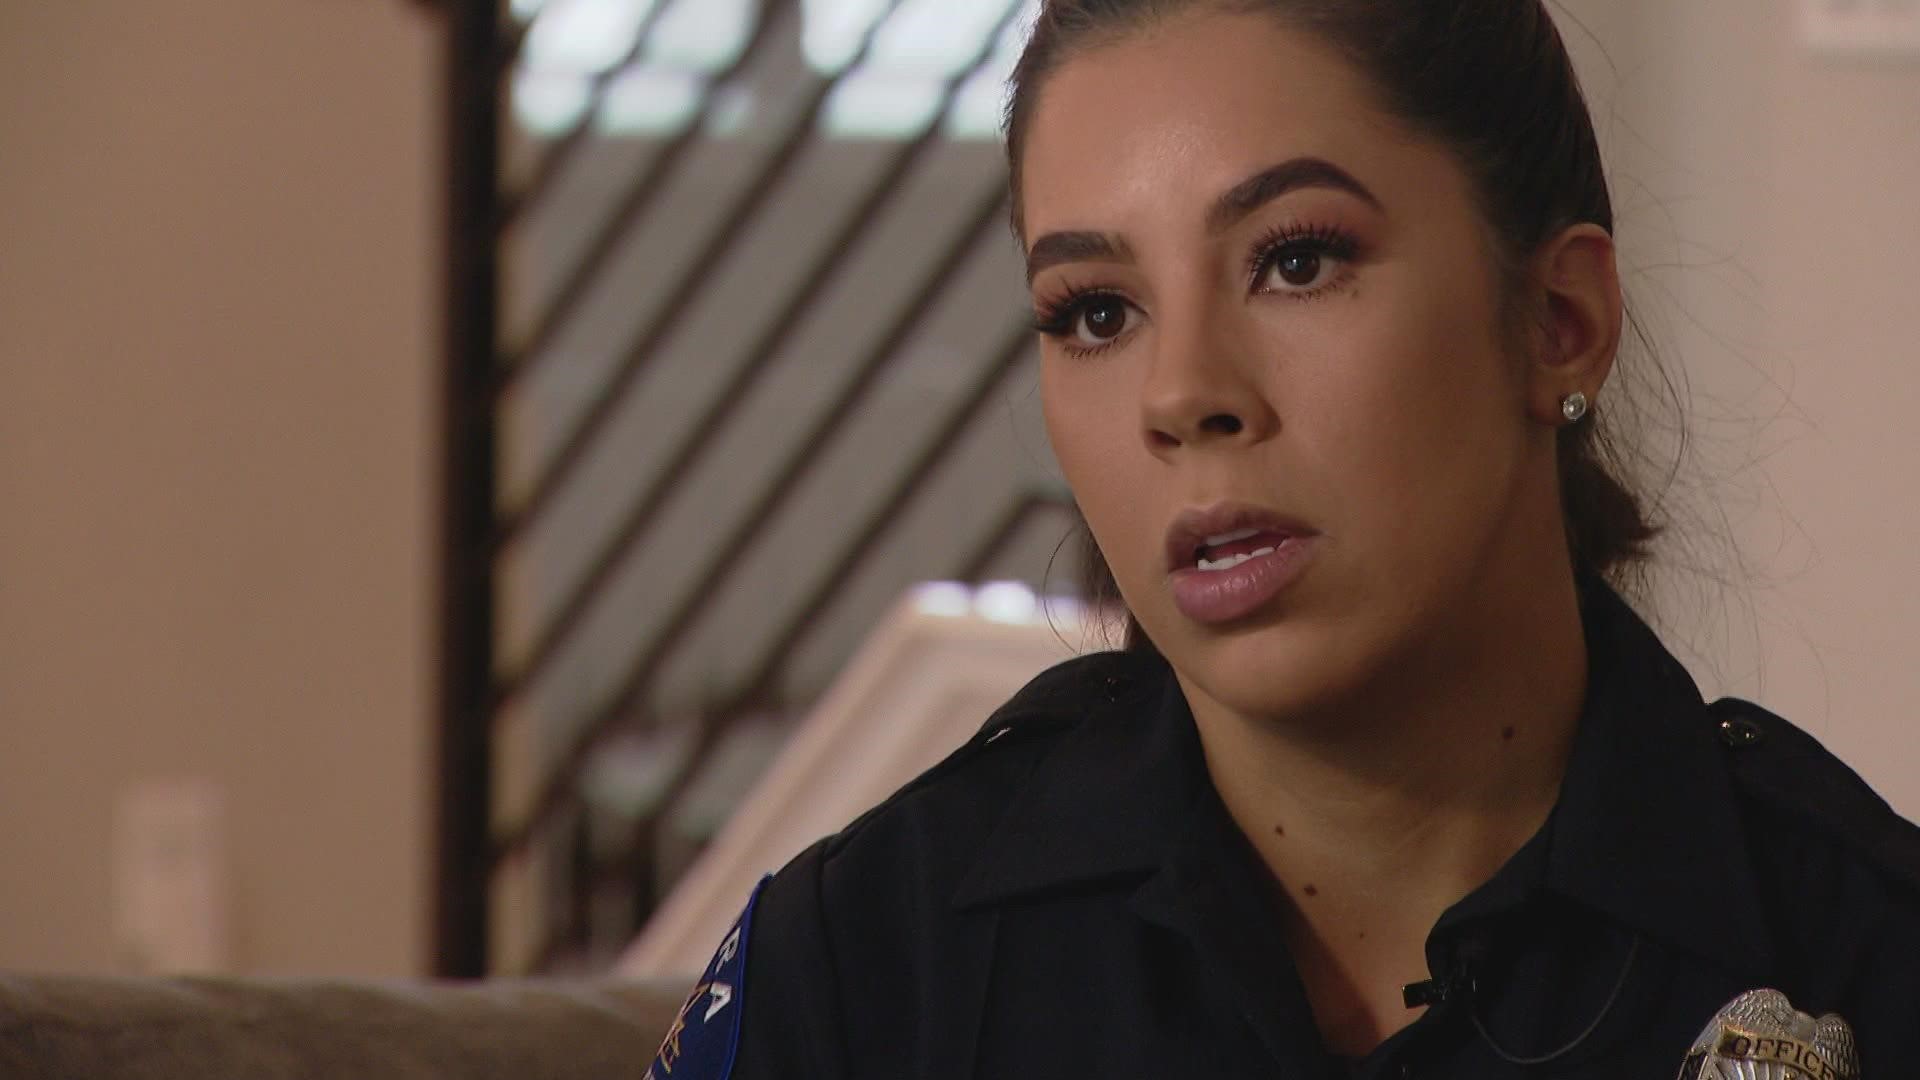 Mary Fernandez is getting ready to put on an all-female police academy. From the officers to the trainees, she wants the emphasis to be helping women enter the force